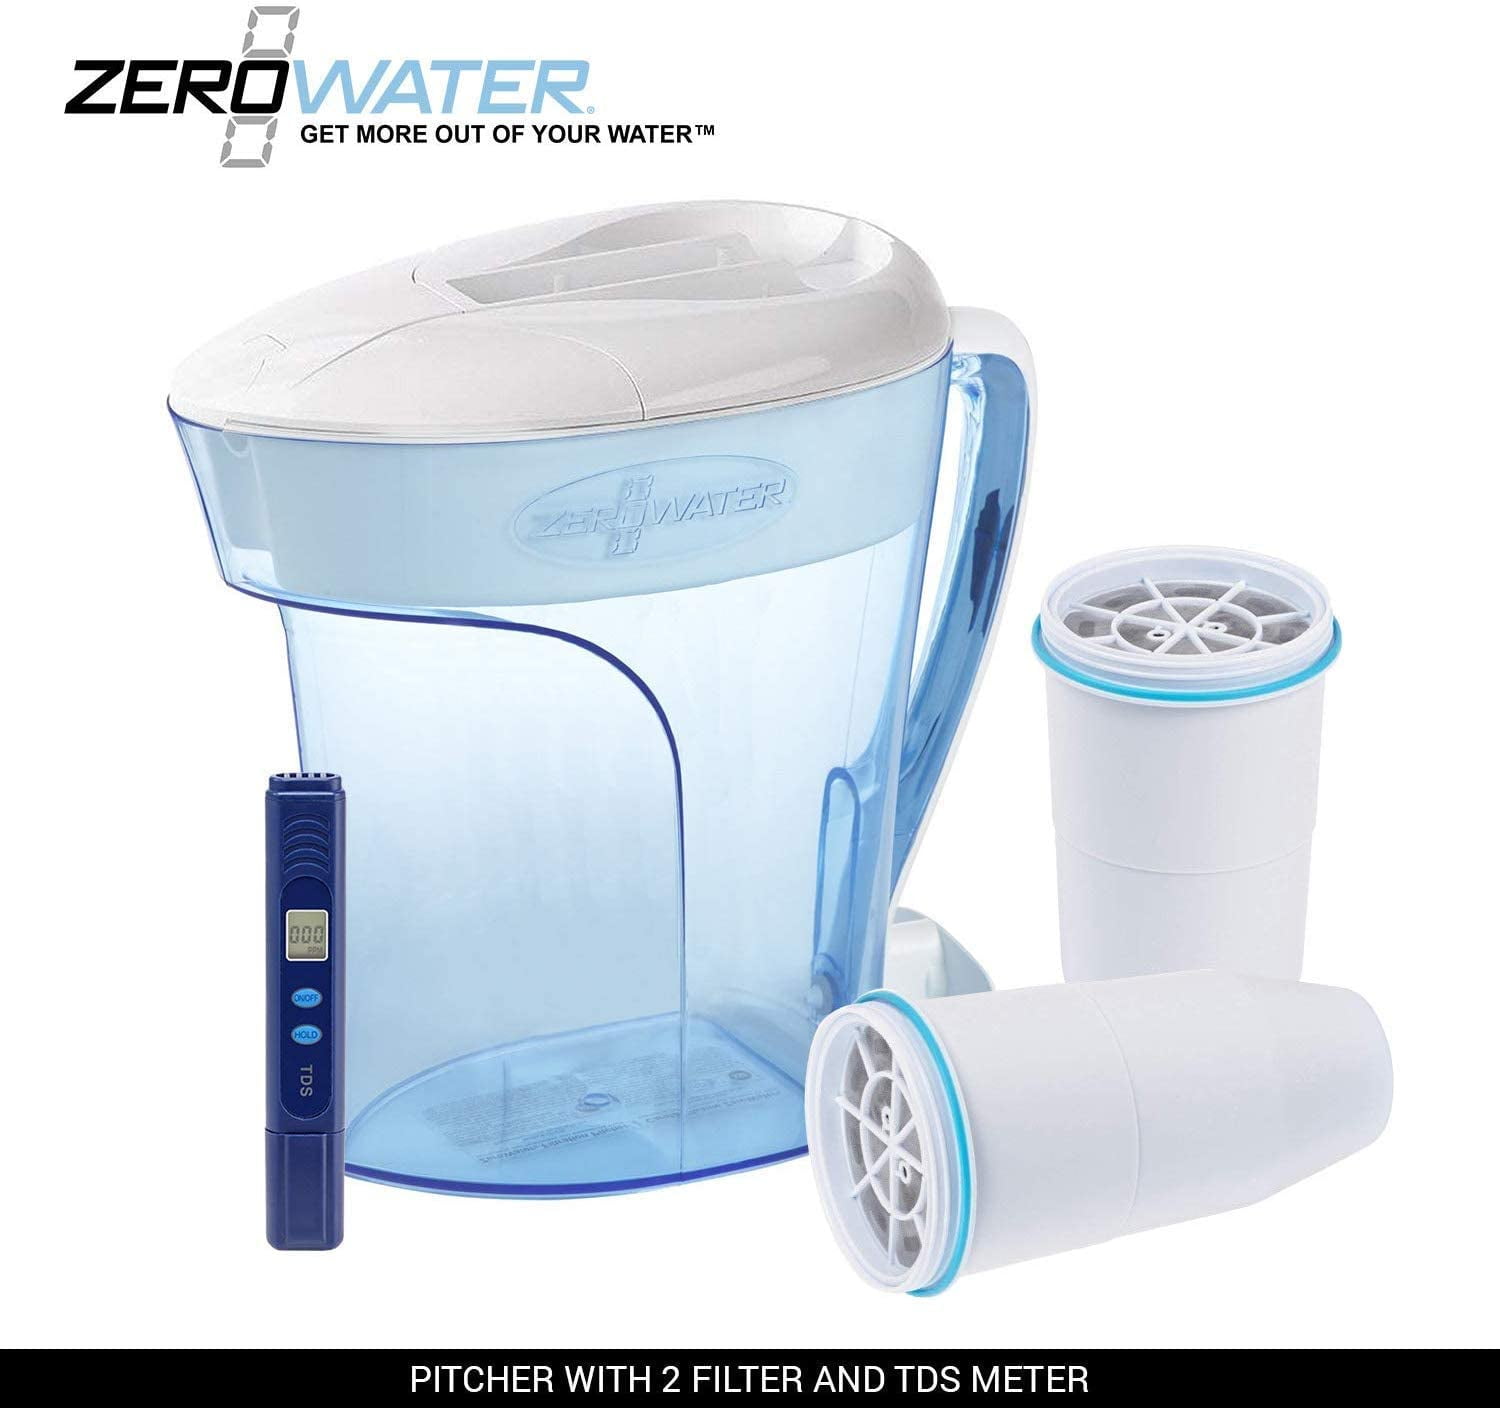 ZP-010, 10 Cup Water Filter Pitcher with Water Quality Meter (Pitcher ...